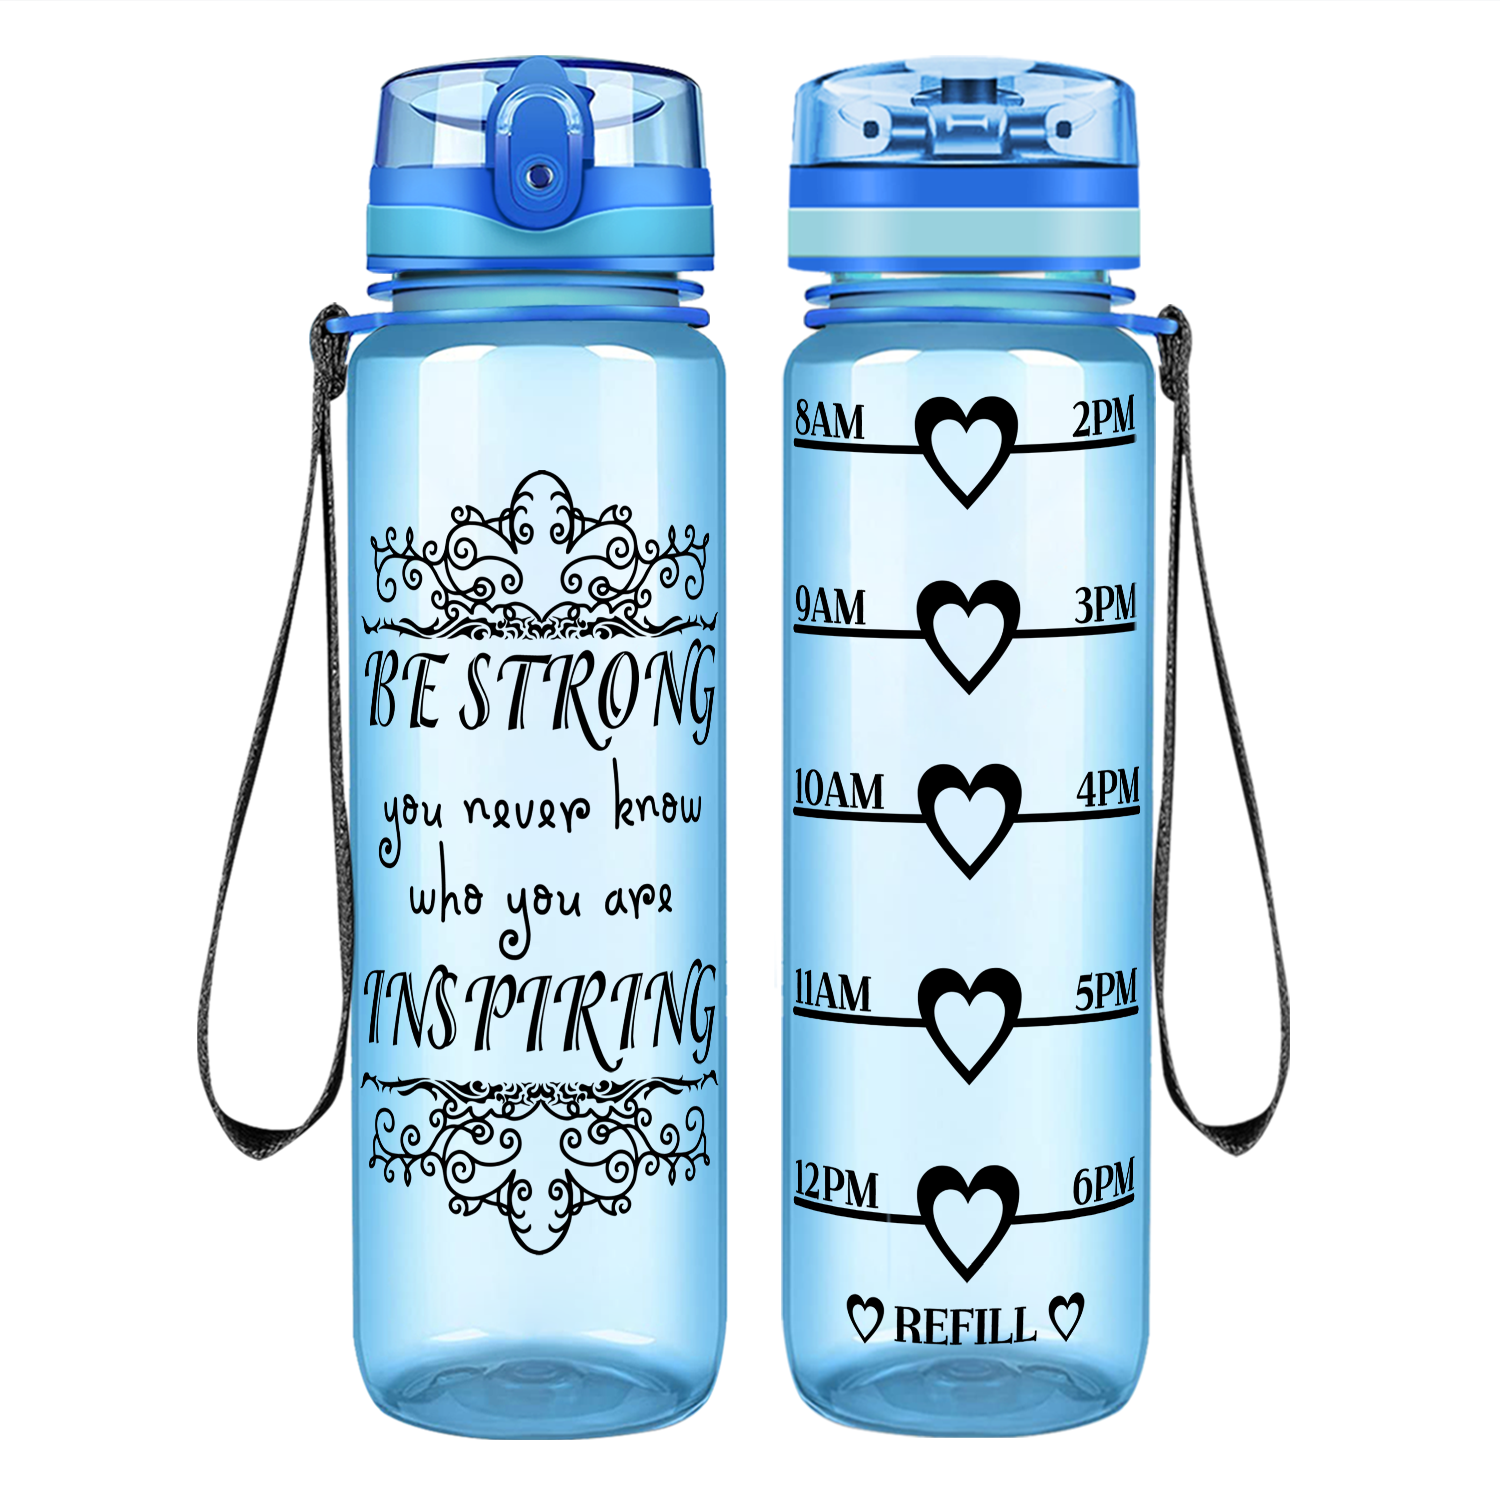 Be Strong Water Bottle Baby Blue Gloss